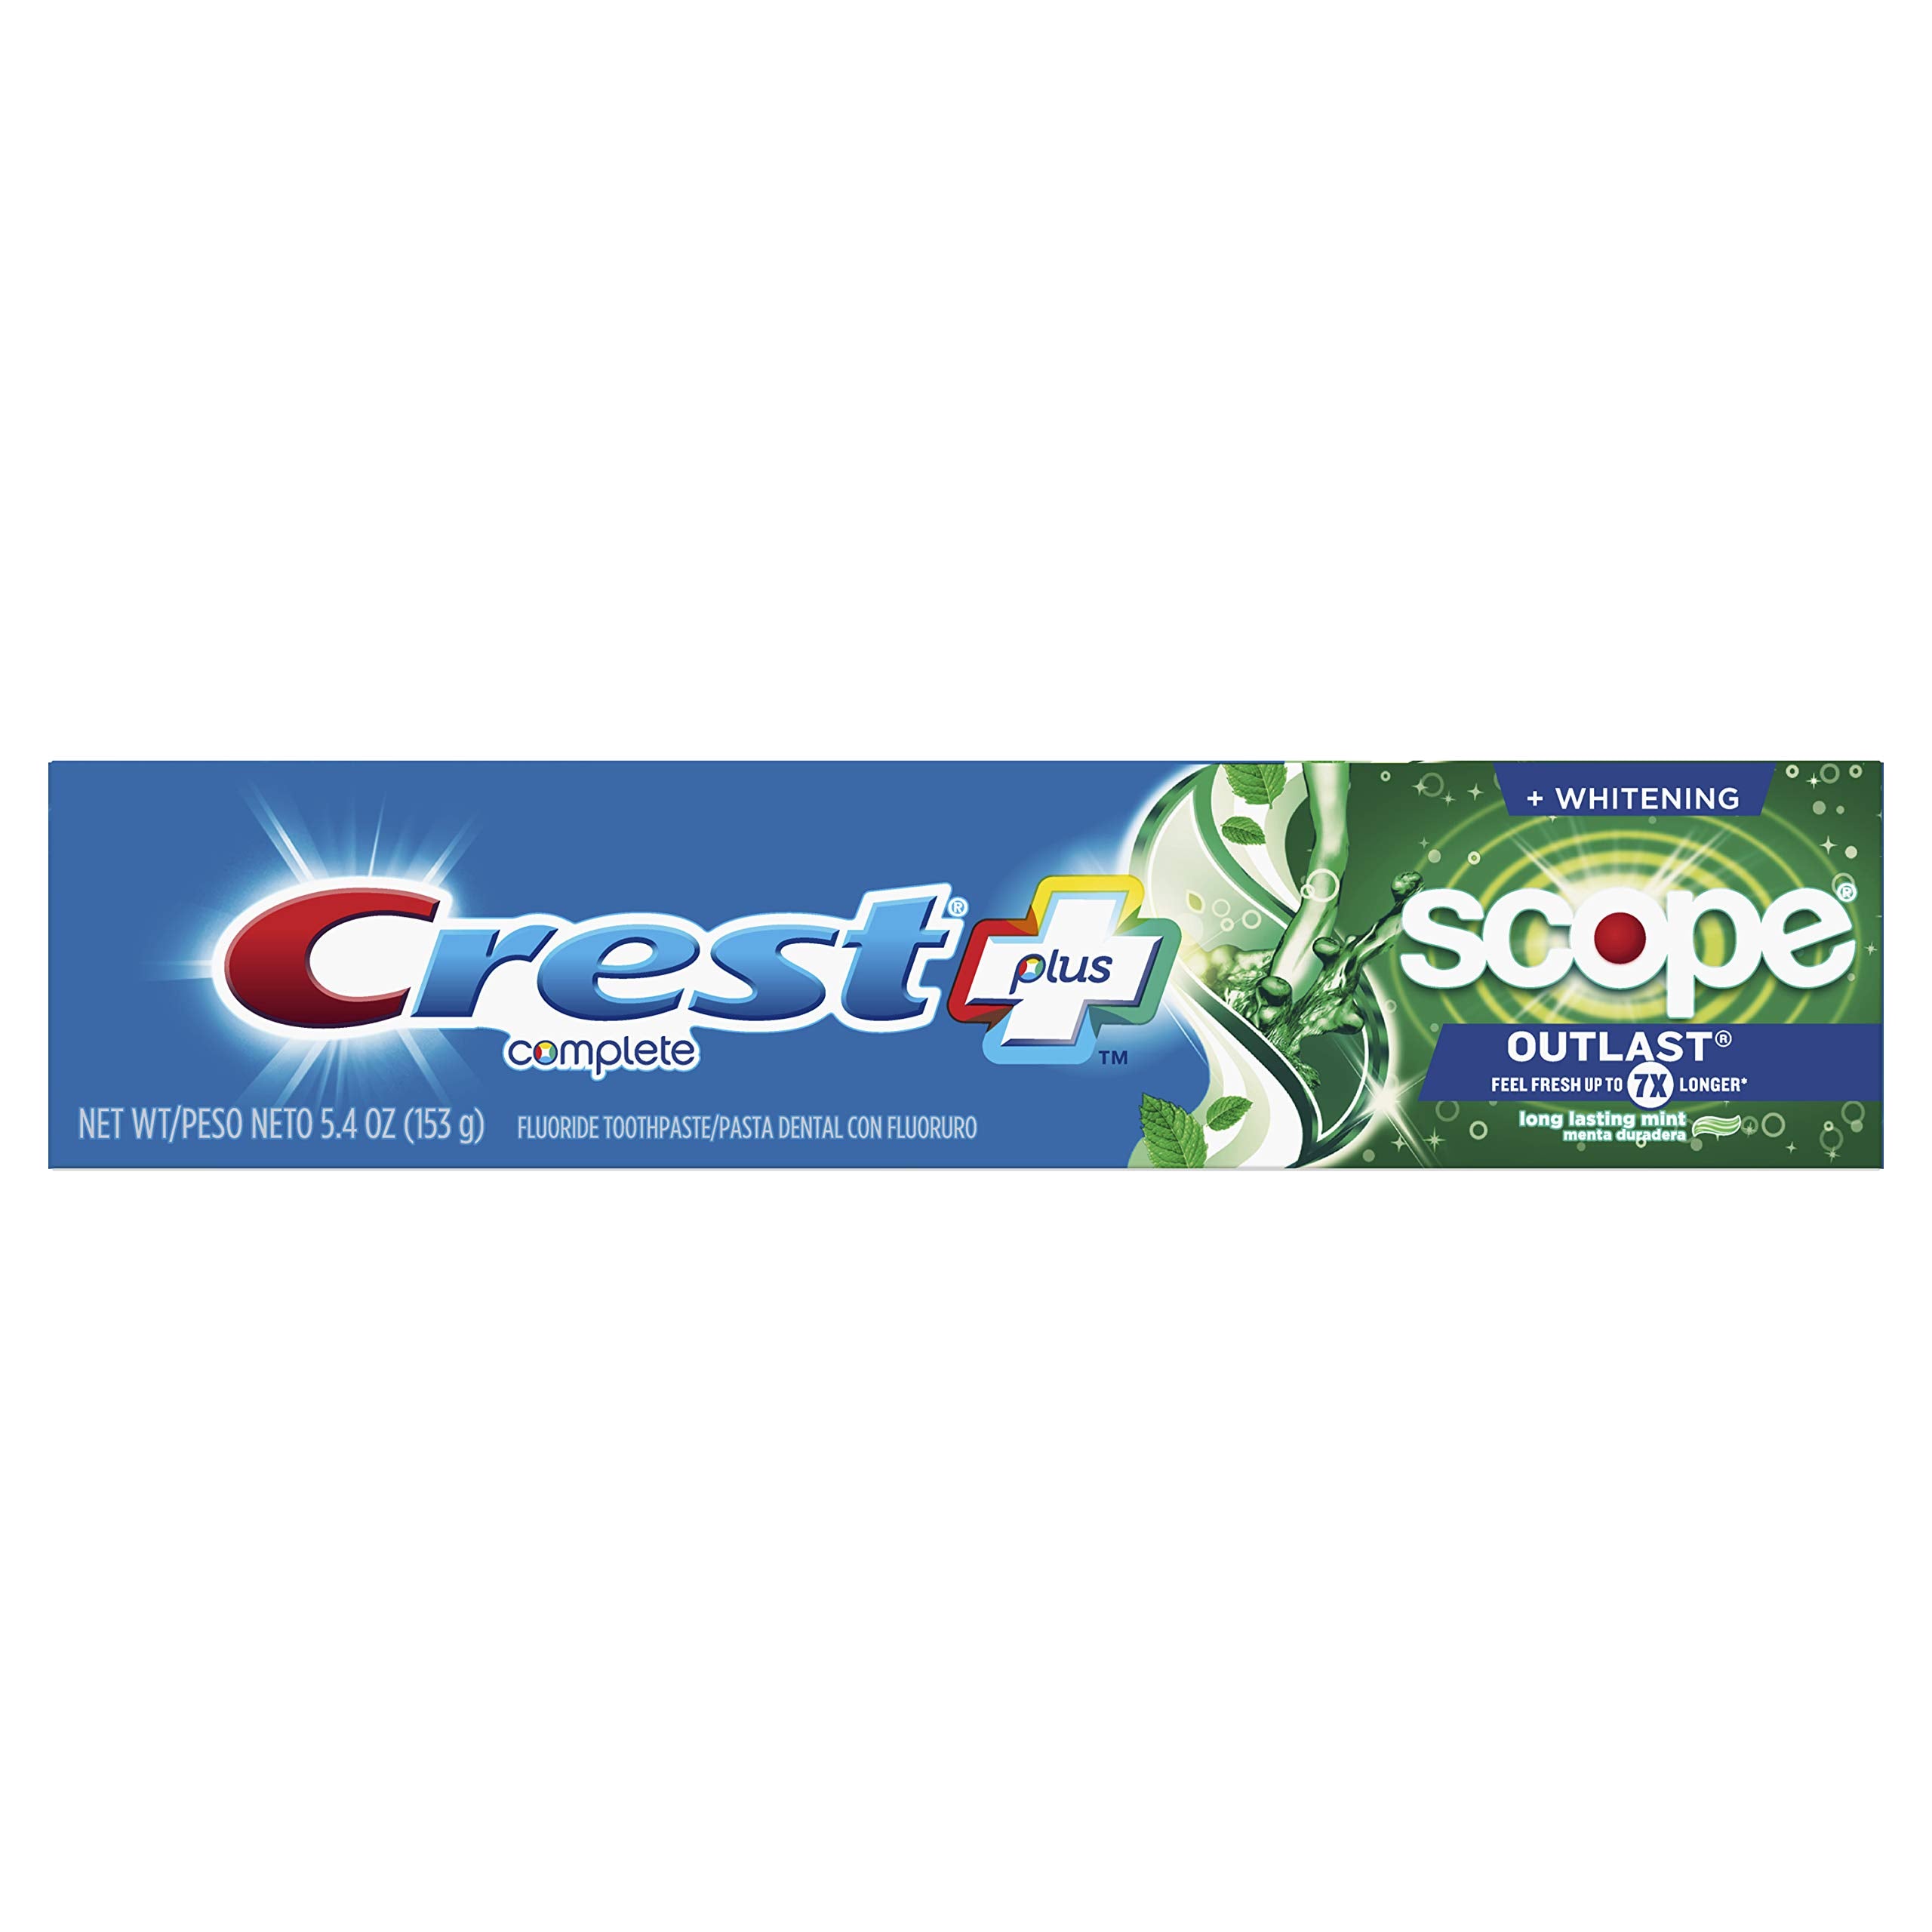 Crest + Scope Outlast Complete Whitening Toothpaste, Mint, 5.4 oz